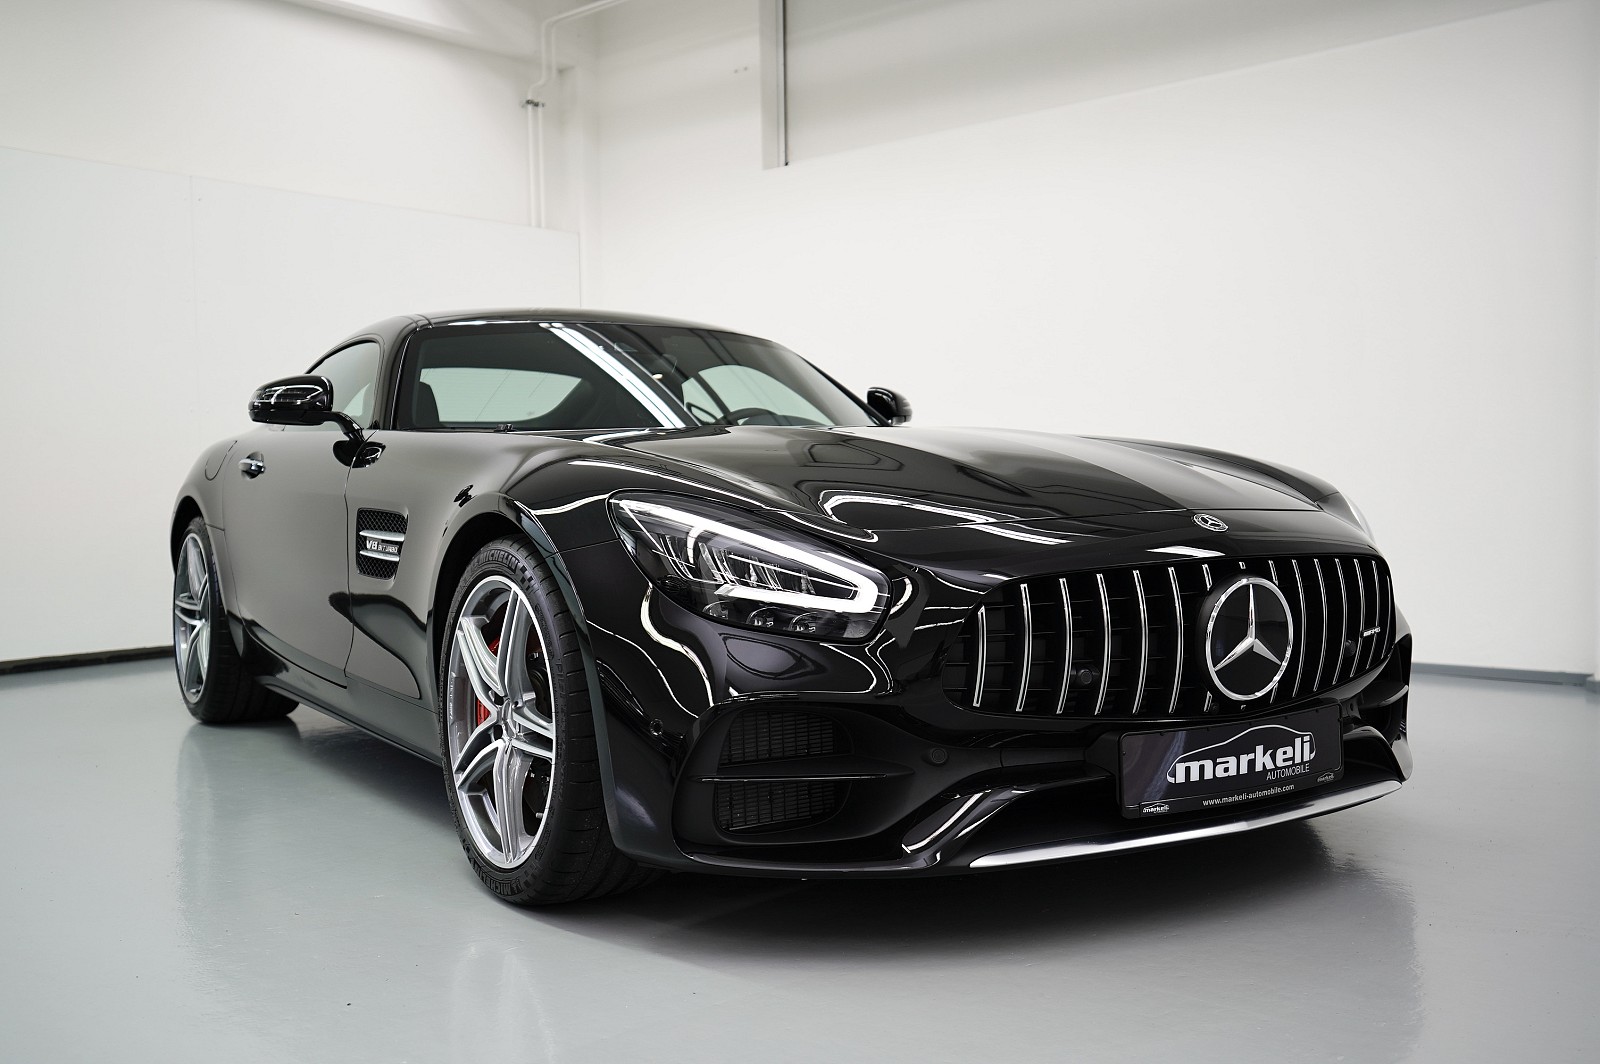 mercedes-amg gt PFERFORMANCE ABGAS/Exhaust ! 390 KW/530 PS - V/max 312 KM/H !